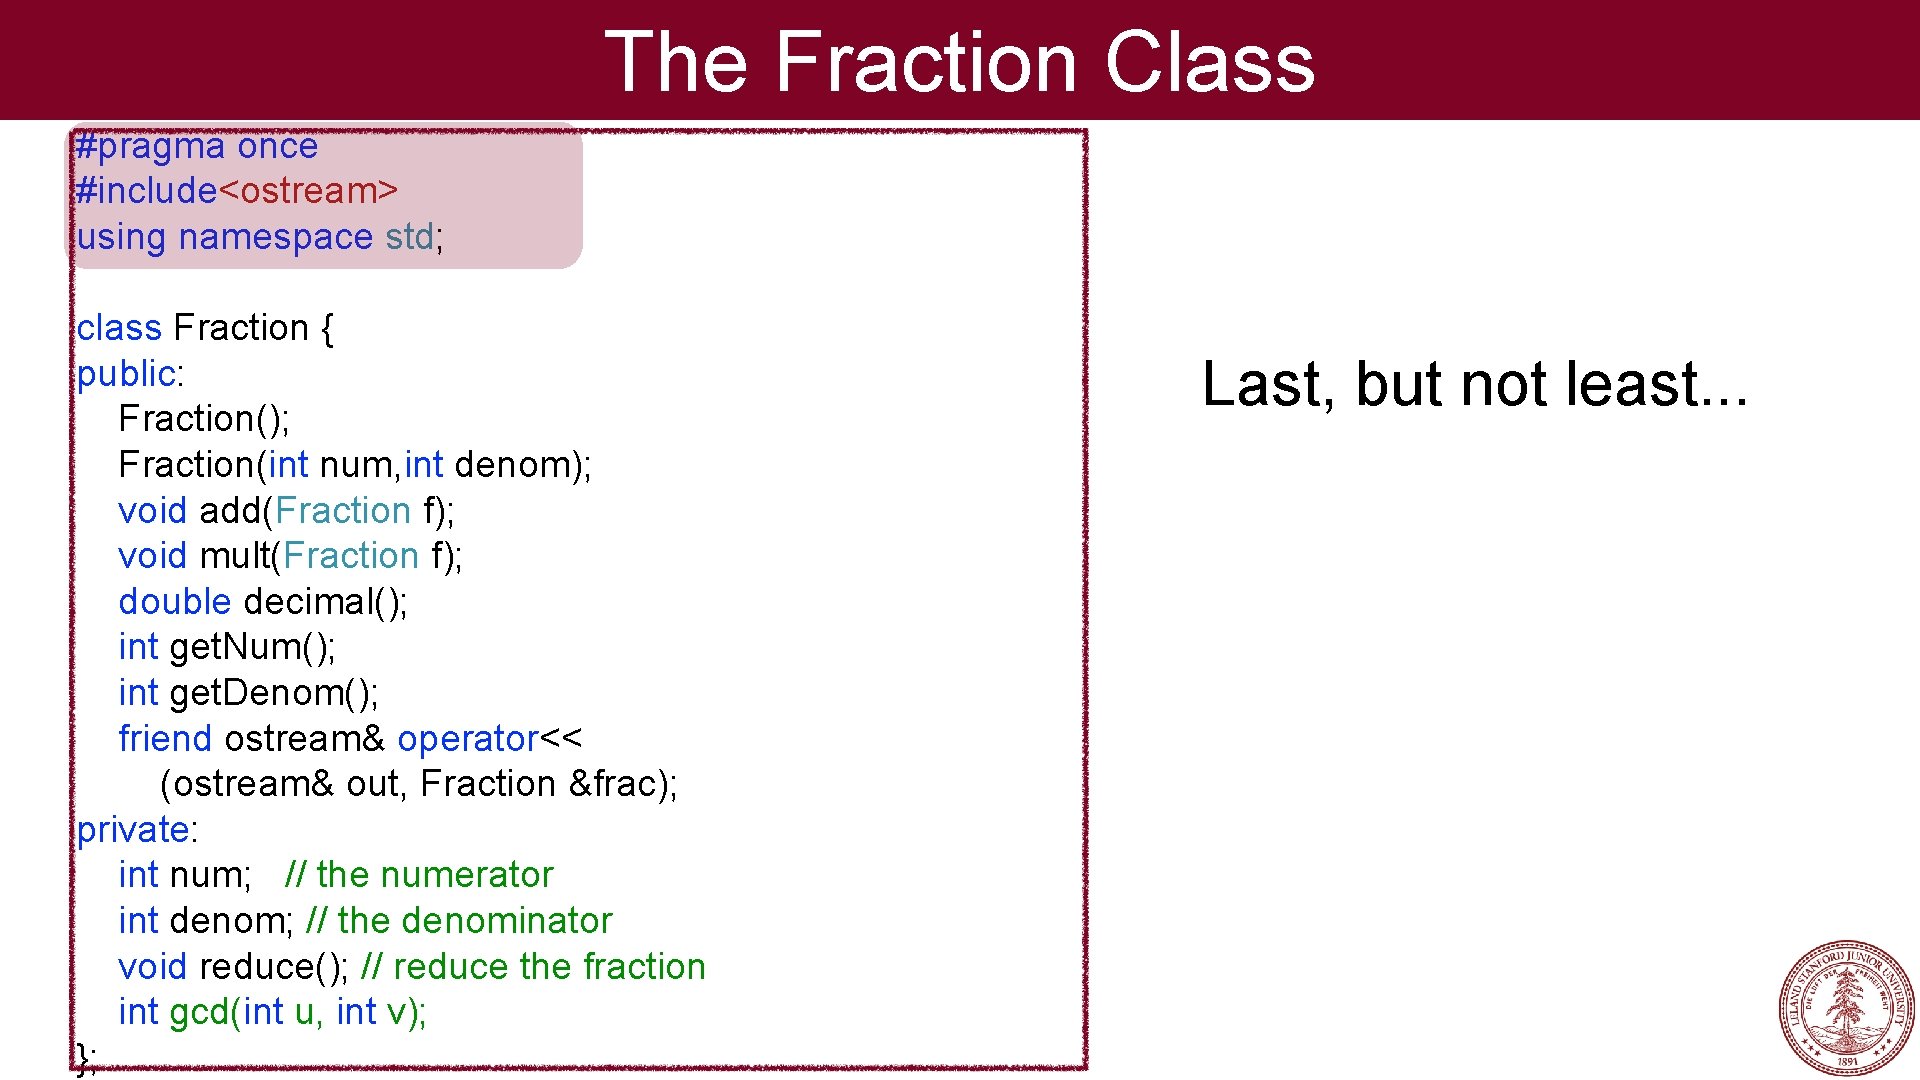 The Fraction Class #pragma once #include<ostream> using namespace std; class Fraction { public: Fraction();